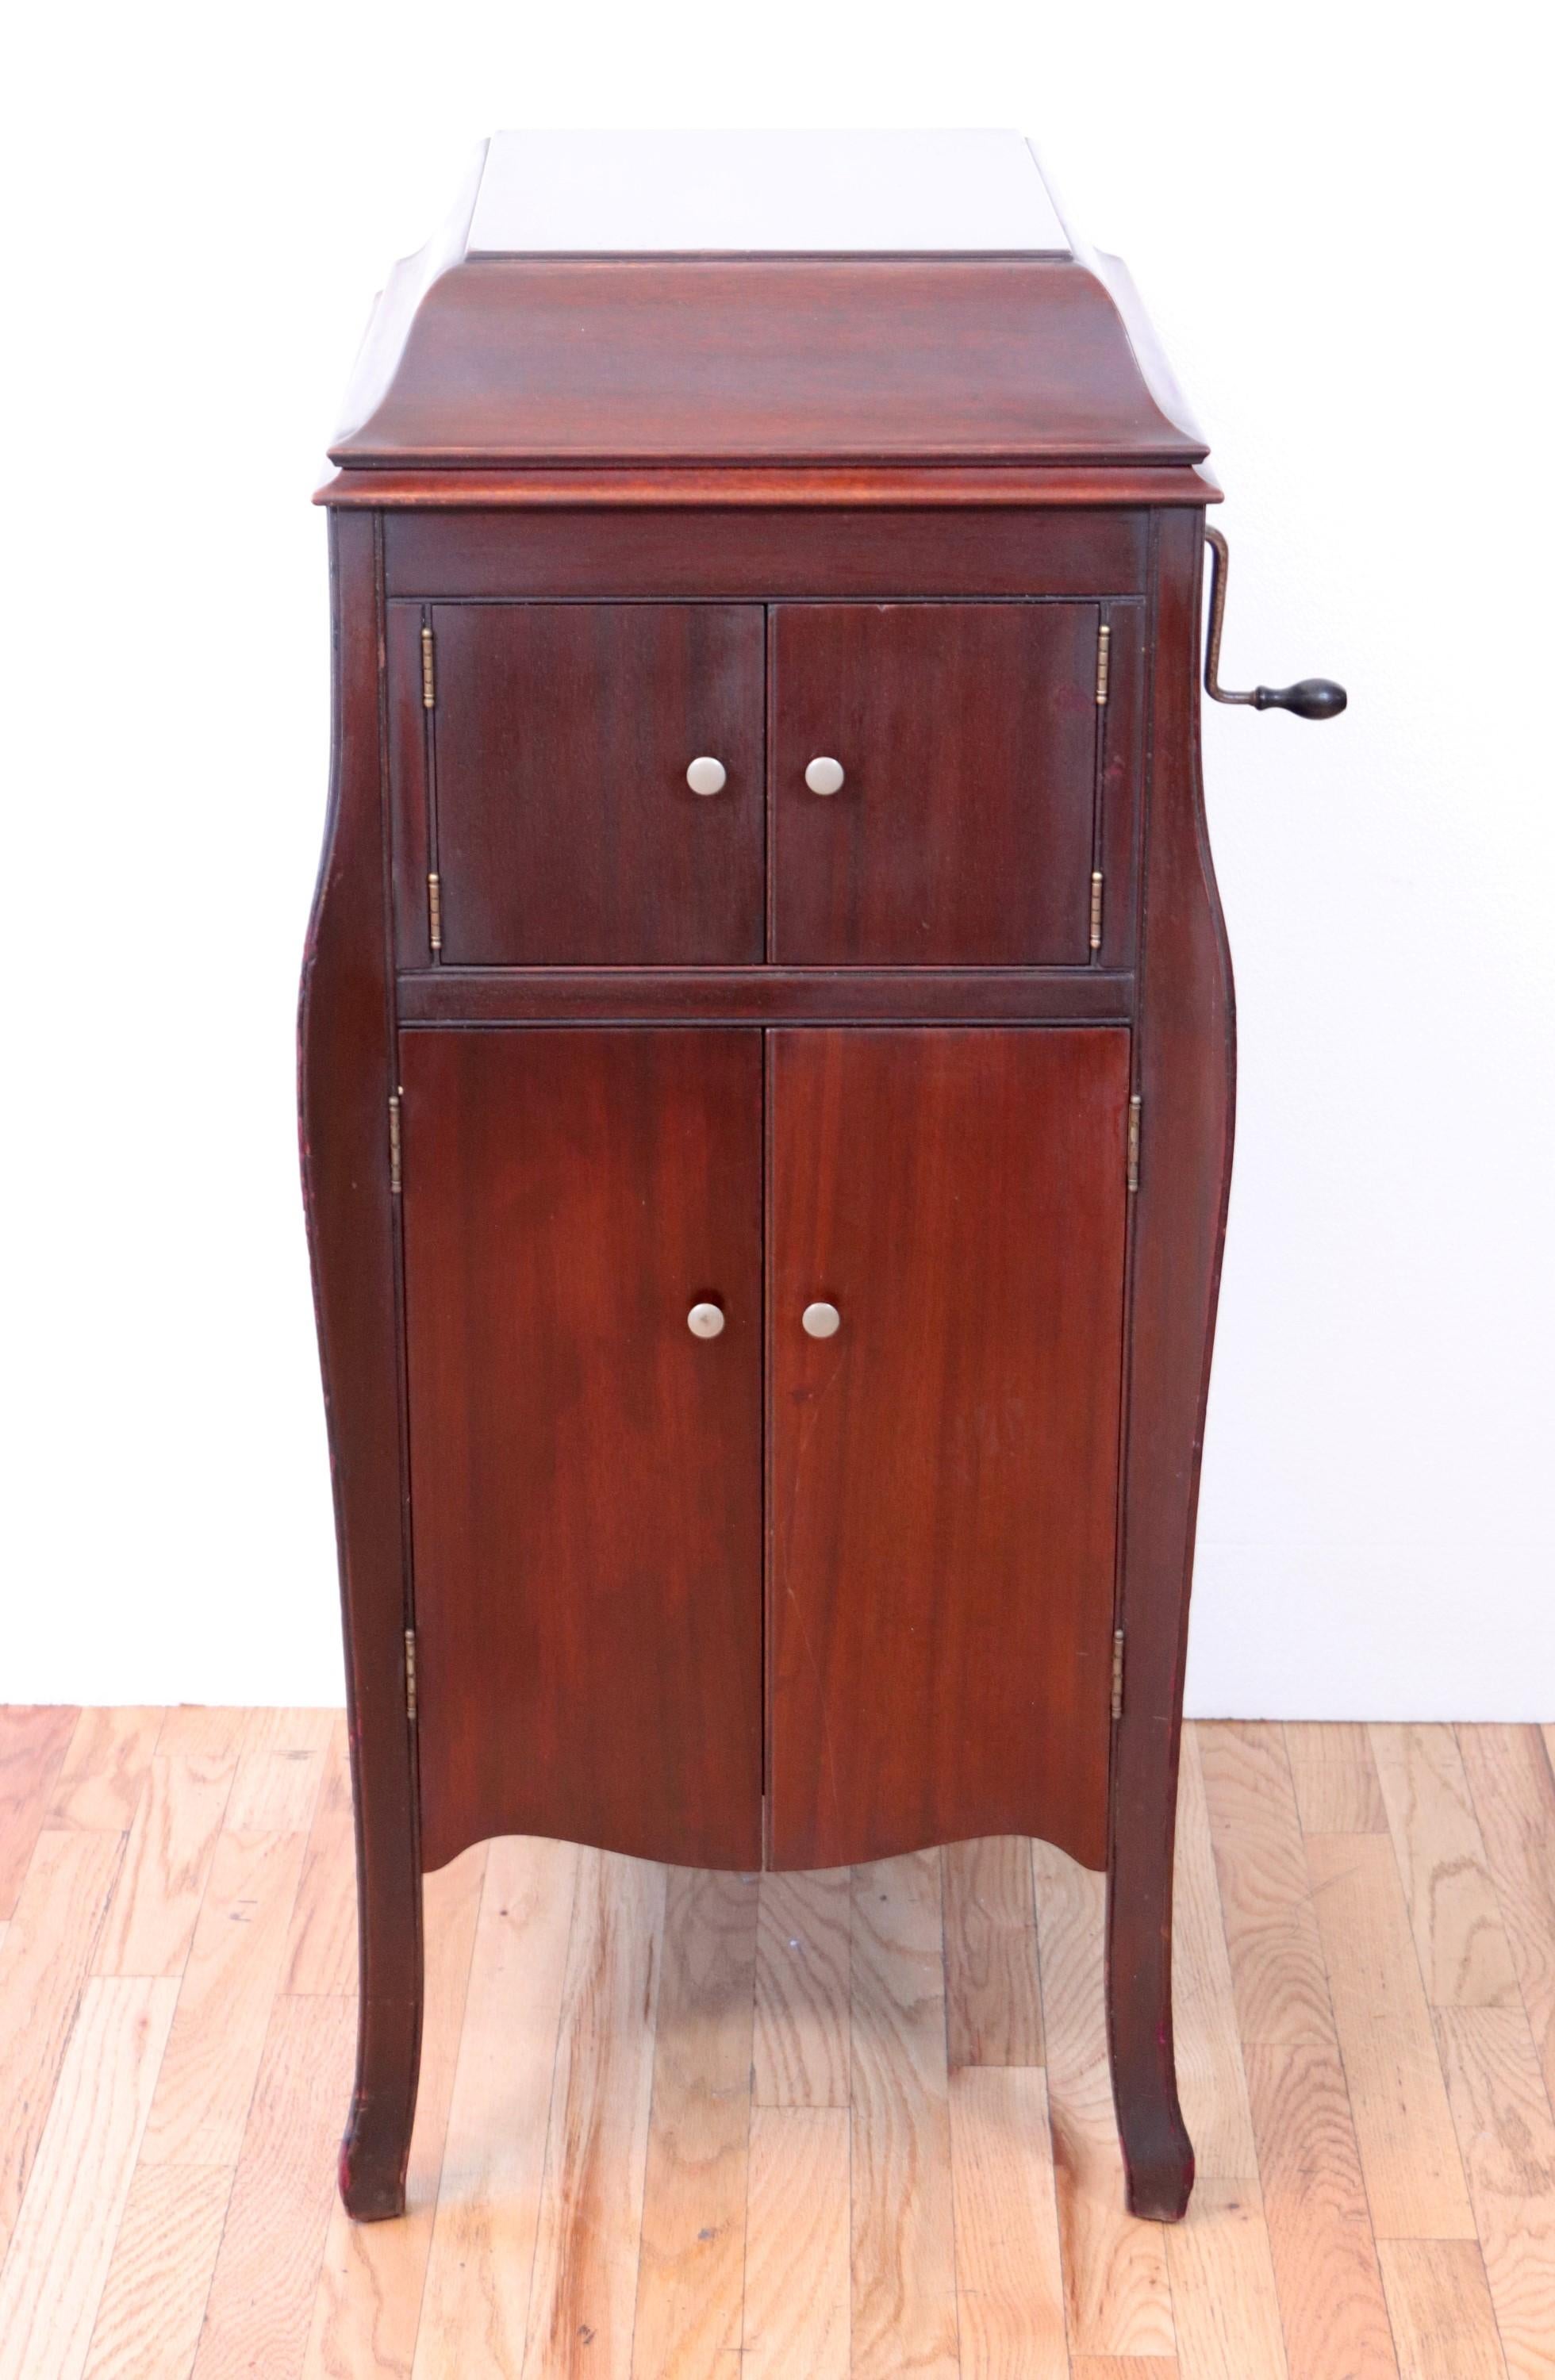 VV-X Victrola Phonograph, wind up record player with ten 78 rpm records. This Model number VV-X 147174J, was manufactured by The Victrola Talking Machine Company. Underneath the phonograph is a mahogany wood cabinet for storage. There is also a wood